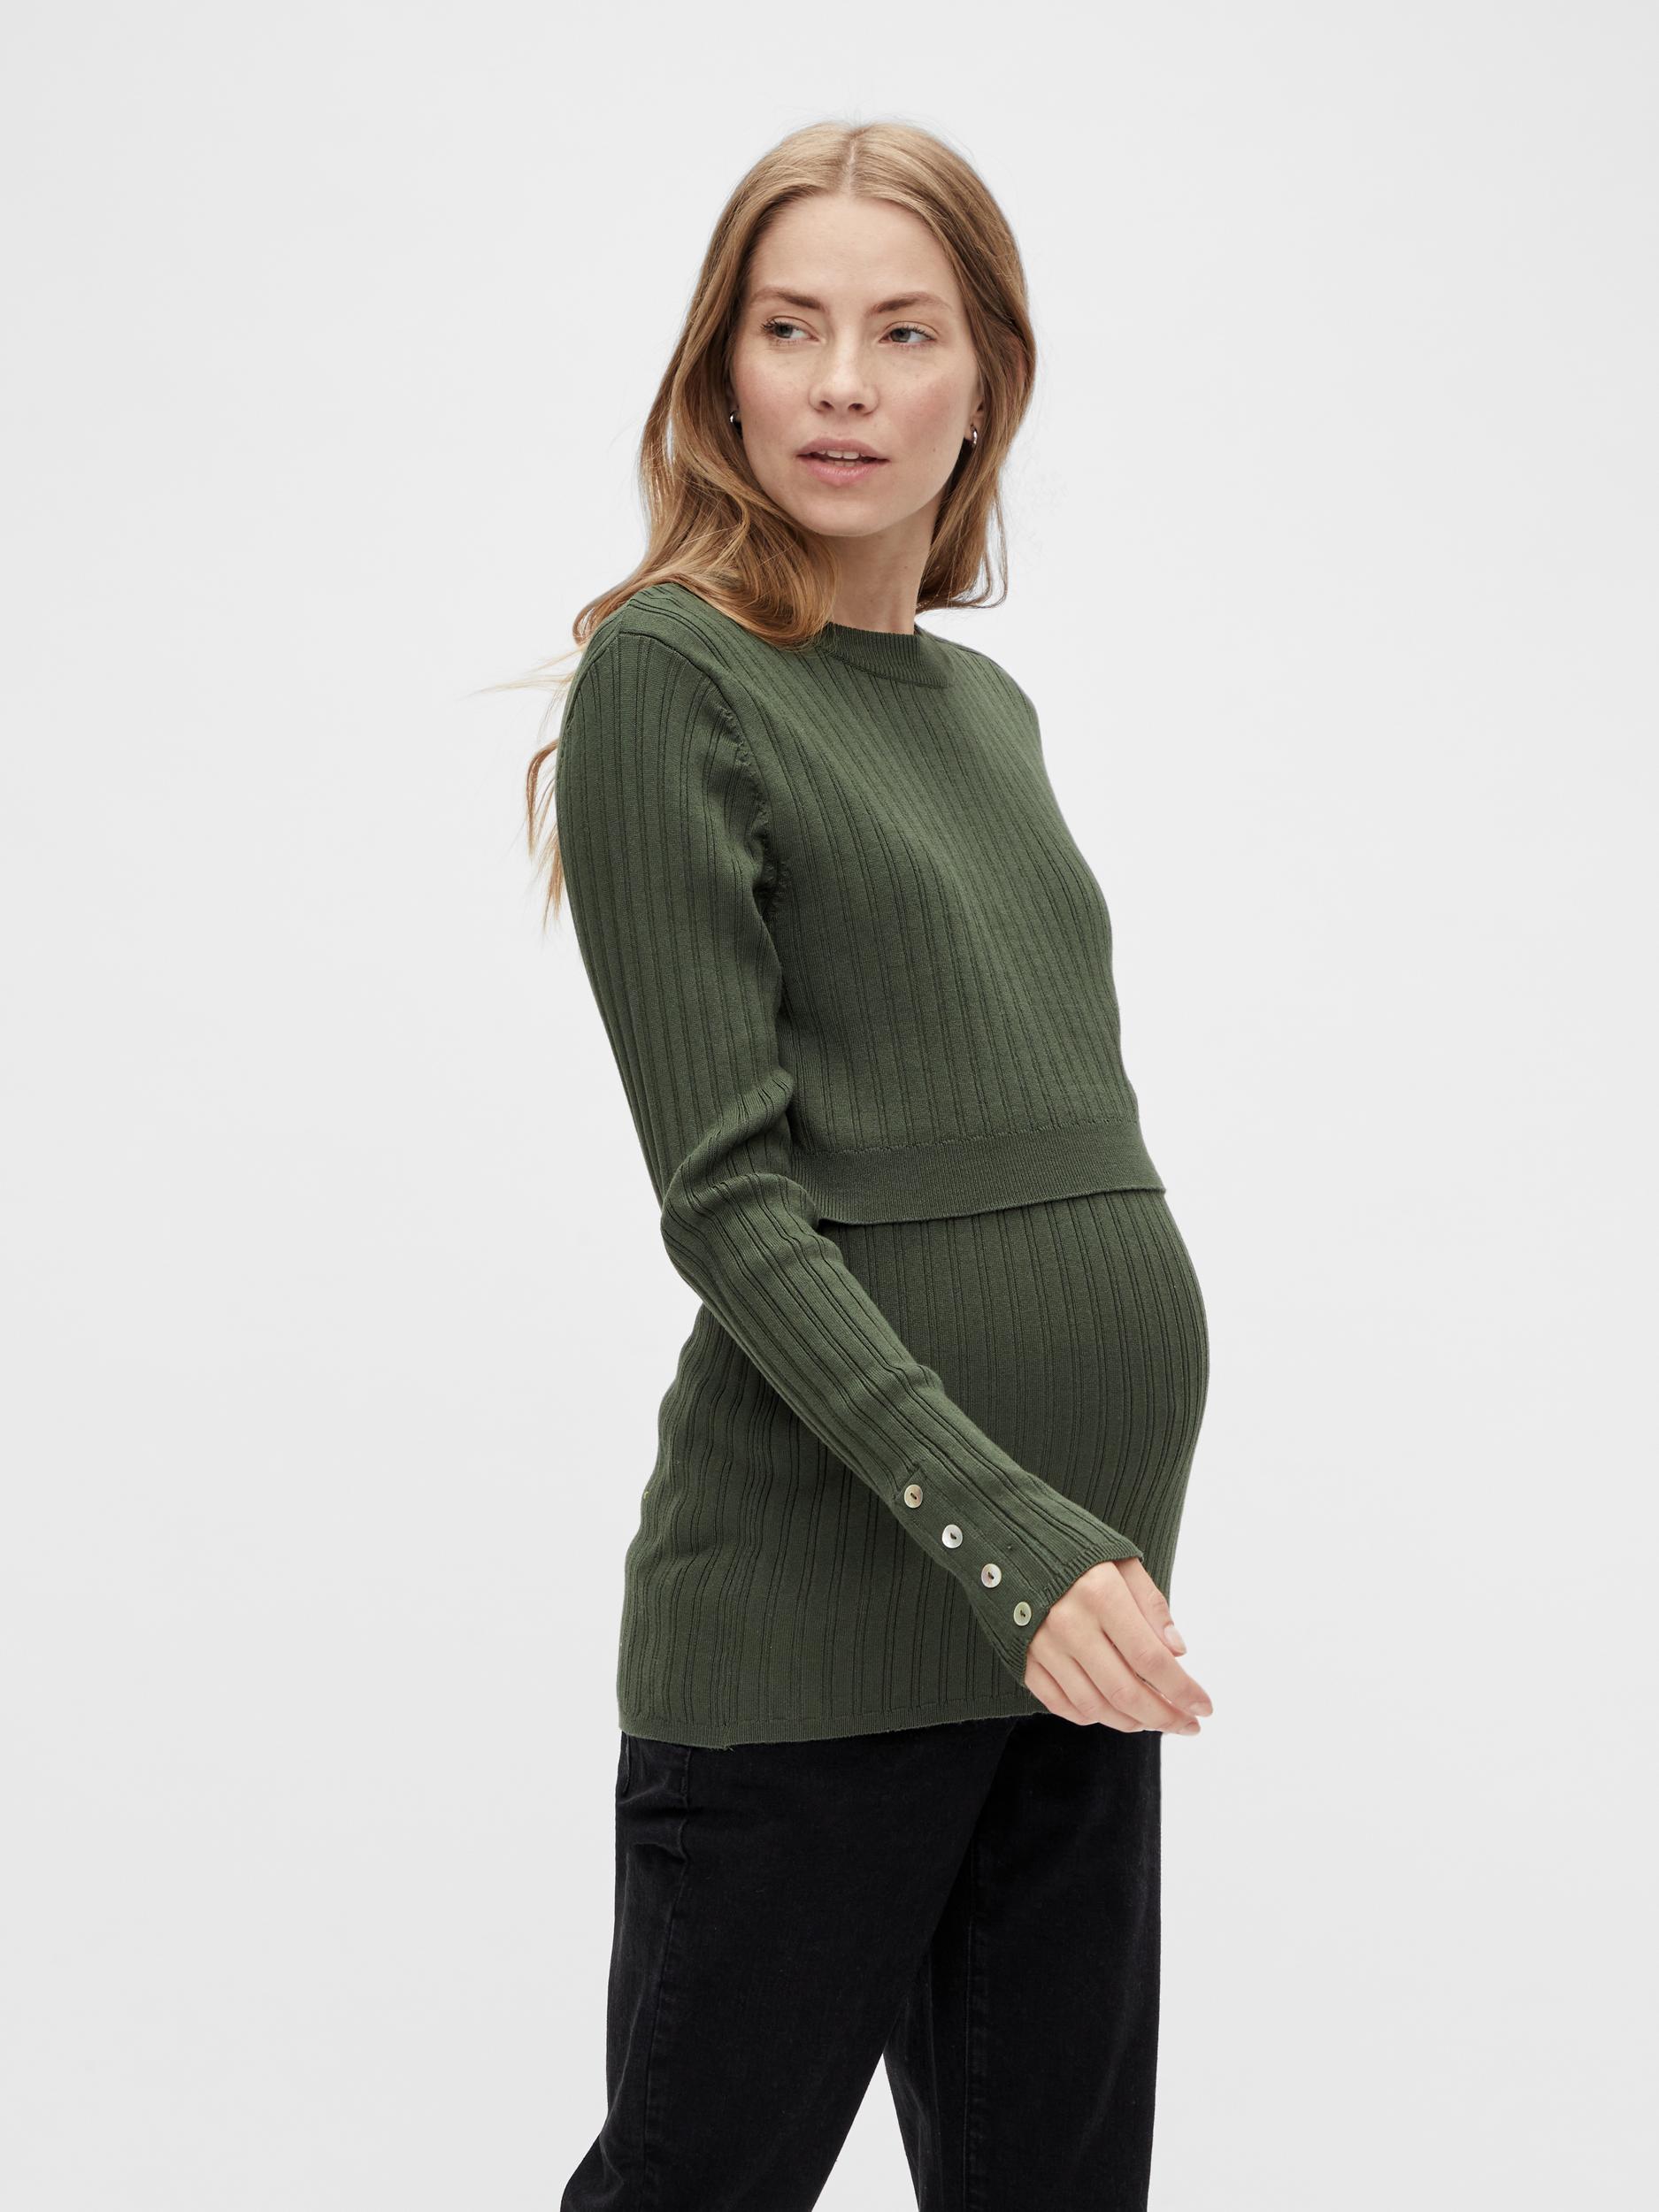 https://www.maternityandmore.ie/wp-content/uploads/2022/11/Maternity-Nursing-Top-Sadie-Climbing-Ivy-20016975-Maternity-and-More-Pregnancy-Wear.jpg